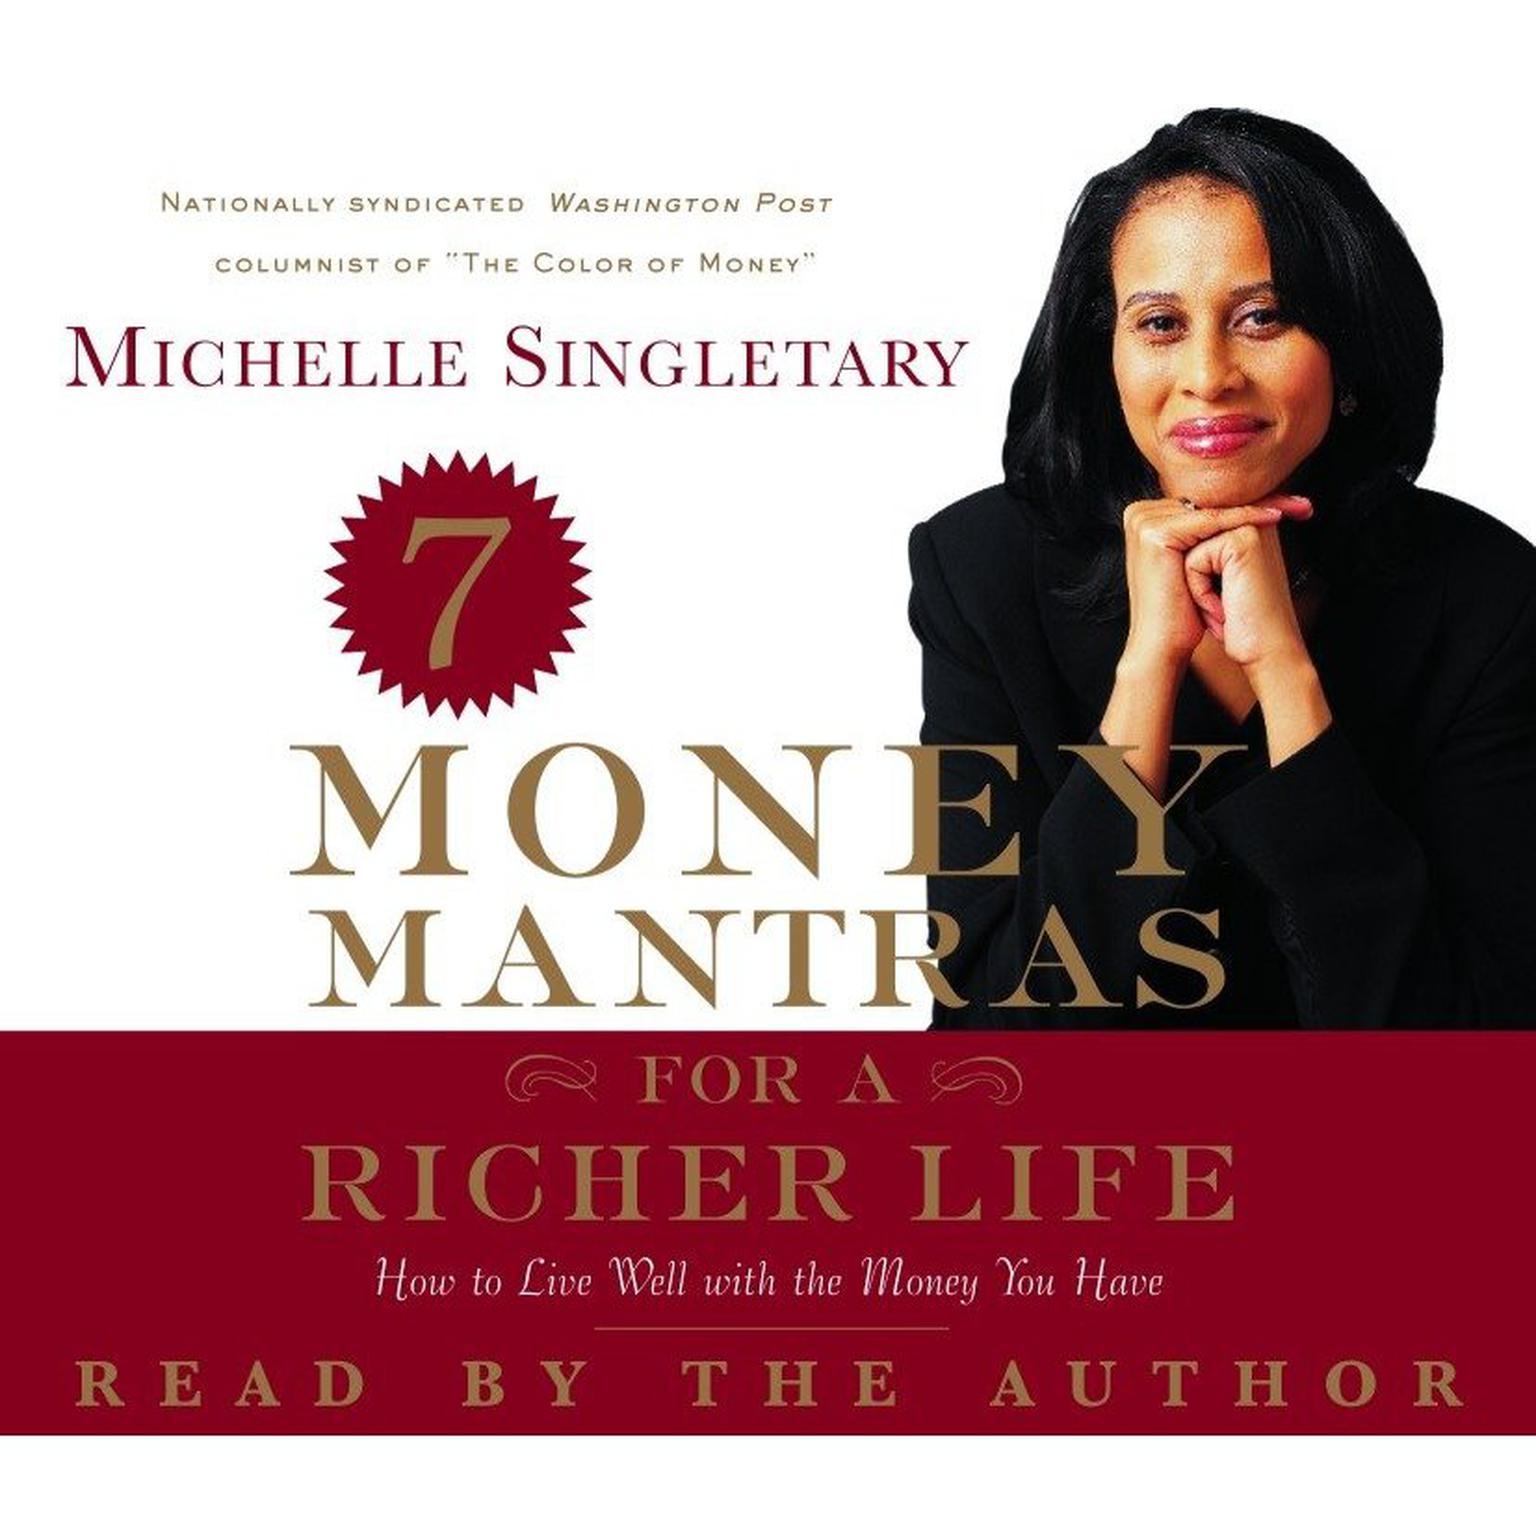 7 Money Mantras for a Richer Life (Abridged): How to Live Well with the Money You Have Audiobook, by Michelle Singletary